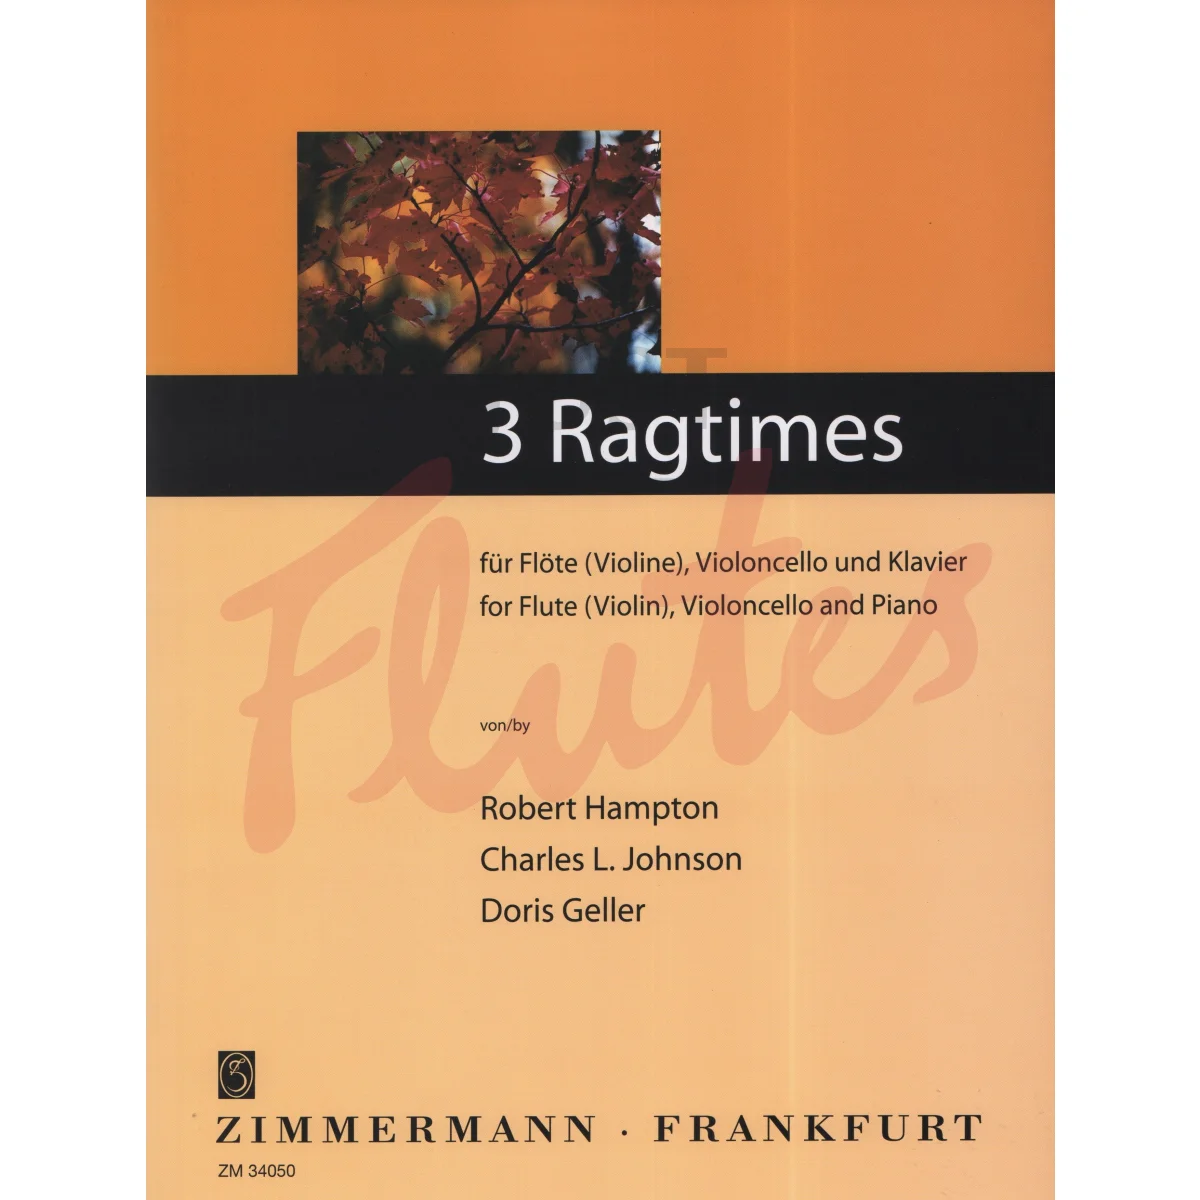 3 Ragtimes for Flute, Cello and Piano